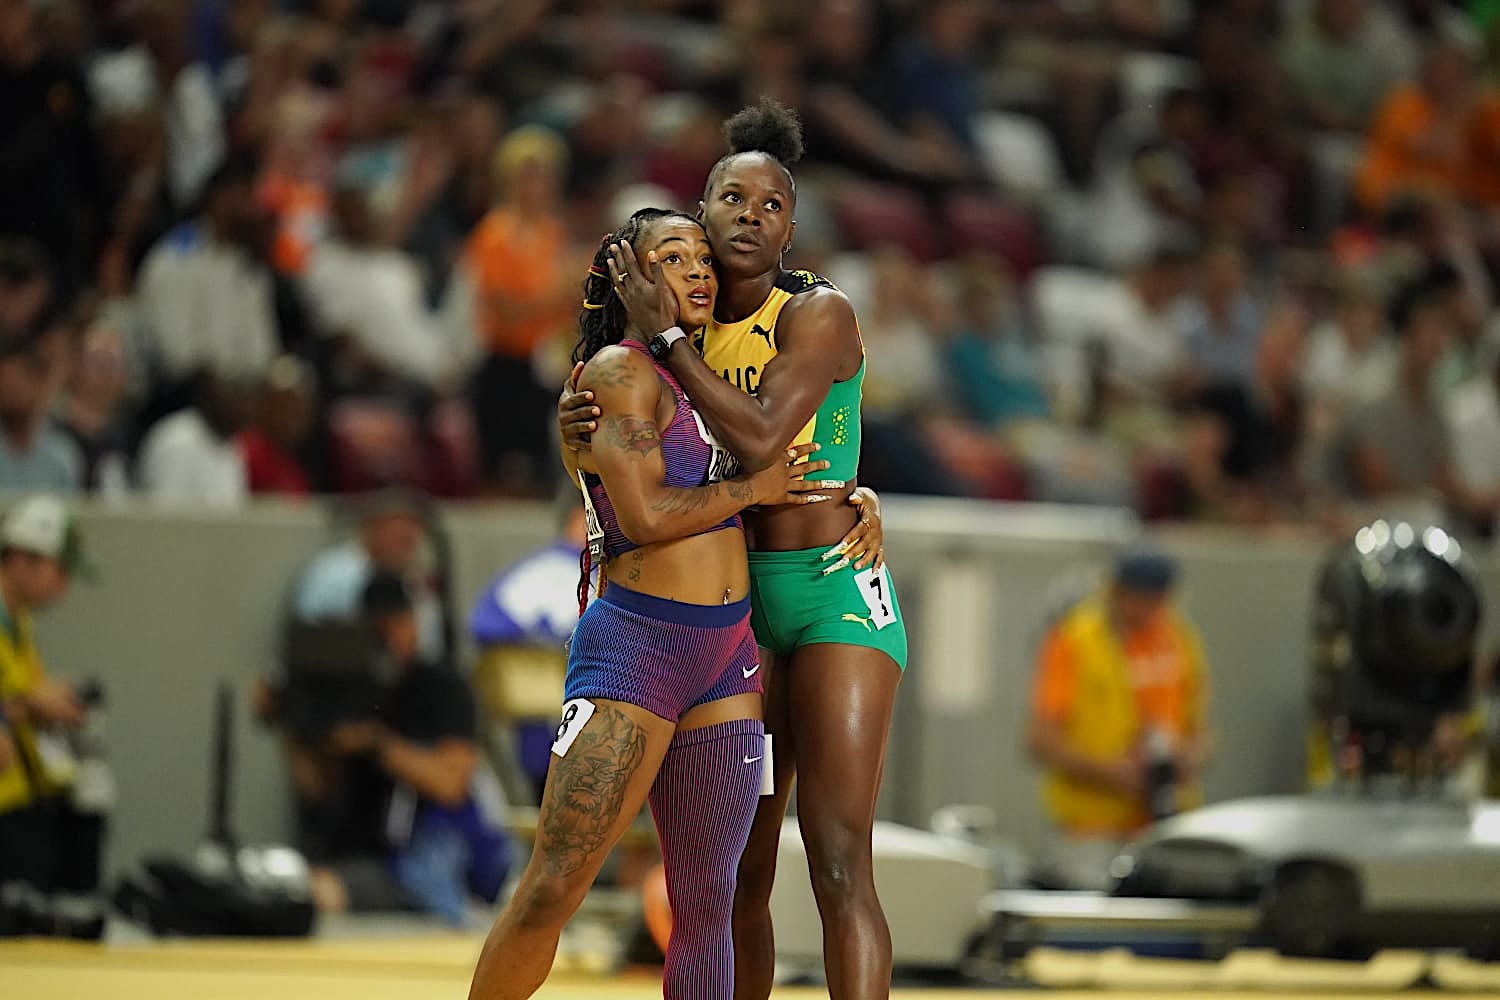 Prefontaine Classic ready to roll - The event Budapest 23 women's 200m will witness a showdown between Shericka Jackson, Sha'Carri Richardson, and Gabby Thomas.